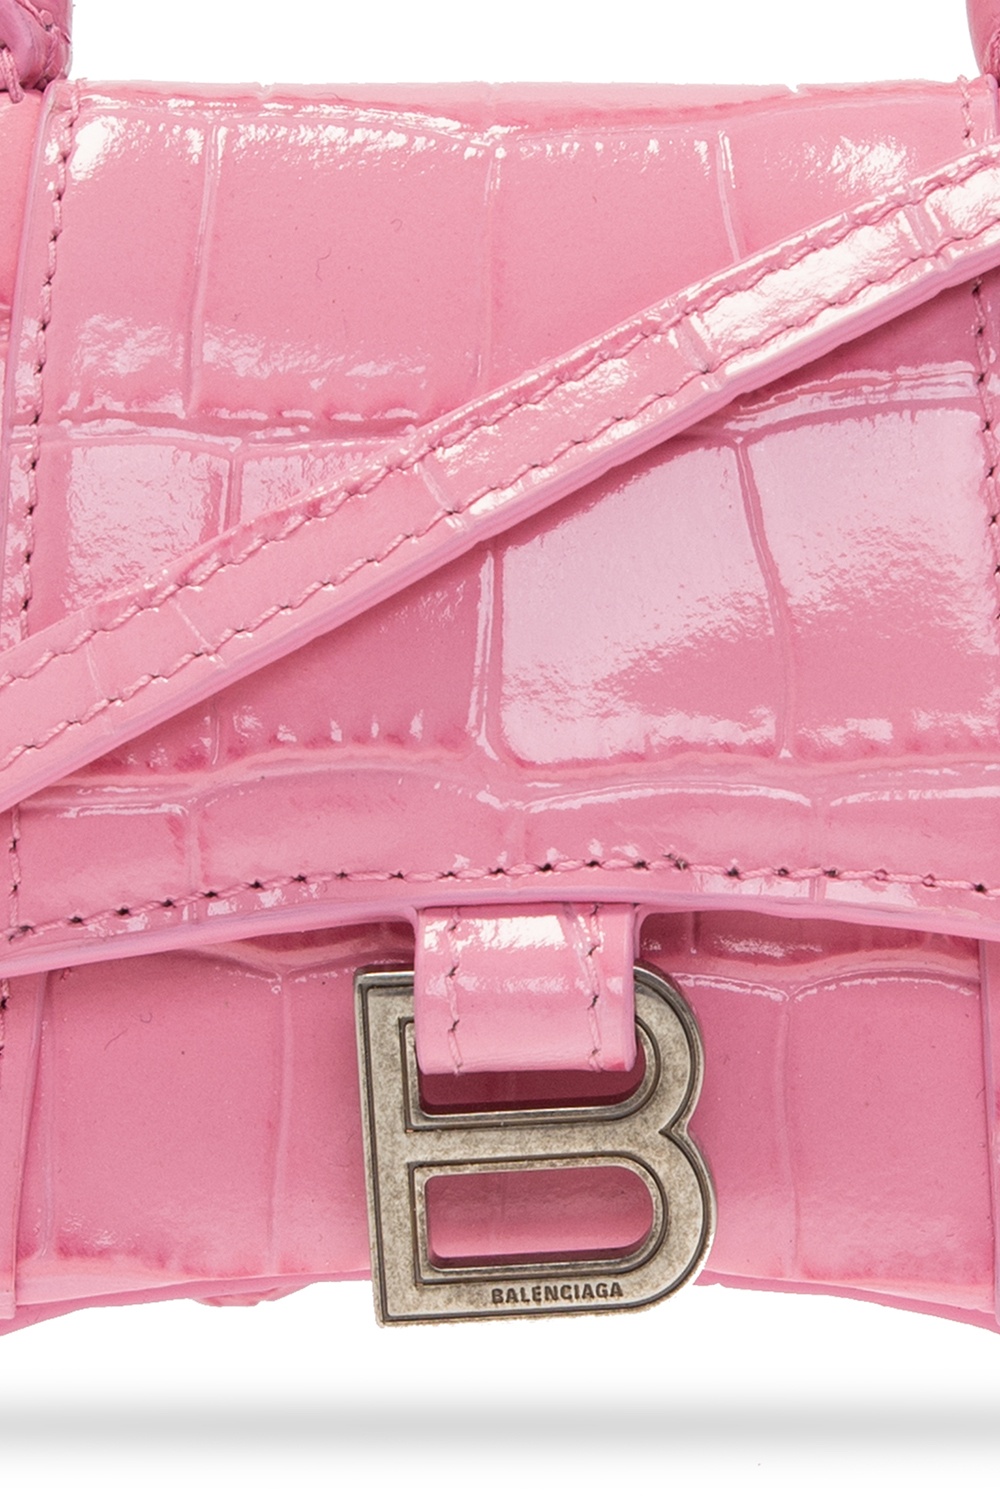 Marc Jacobs Pink Leather Lola Bag with Umbrella